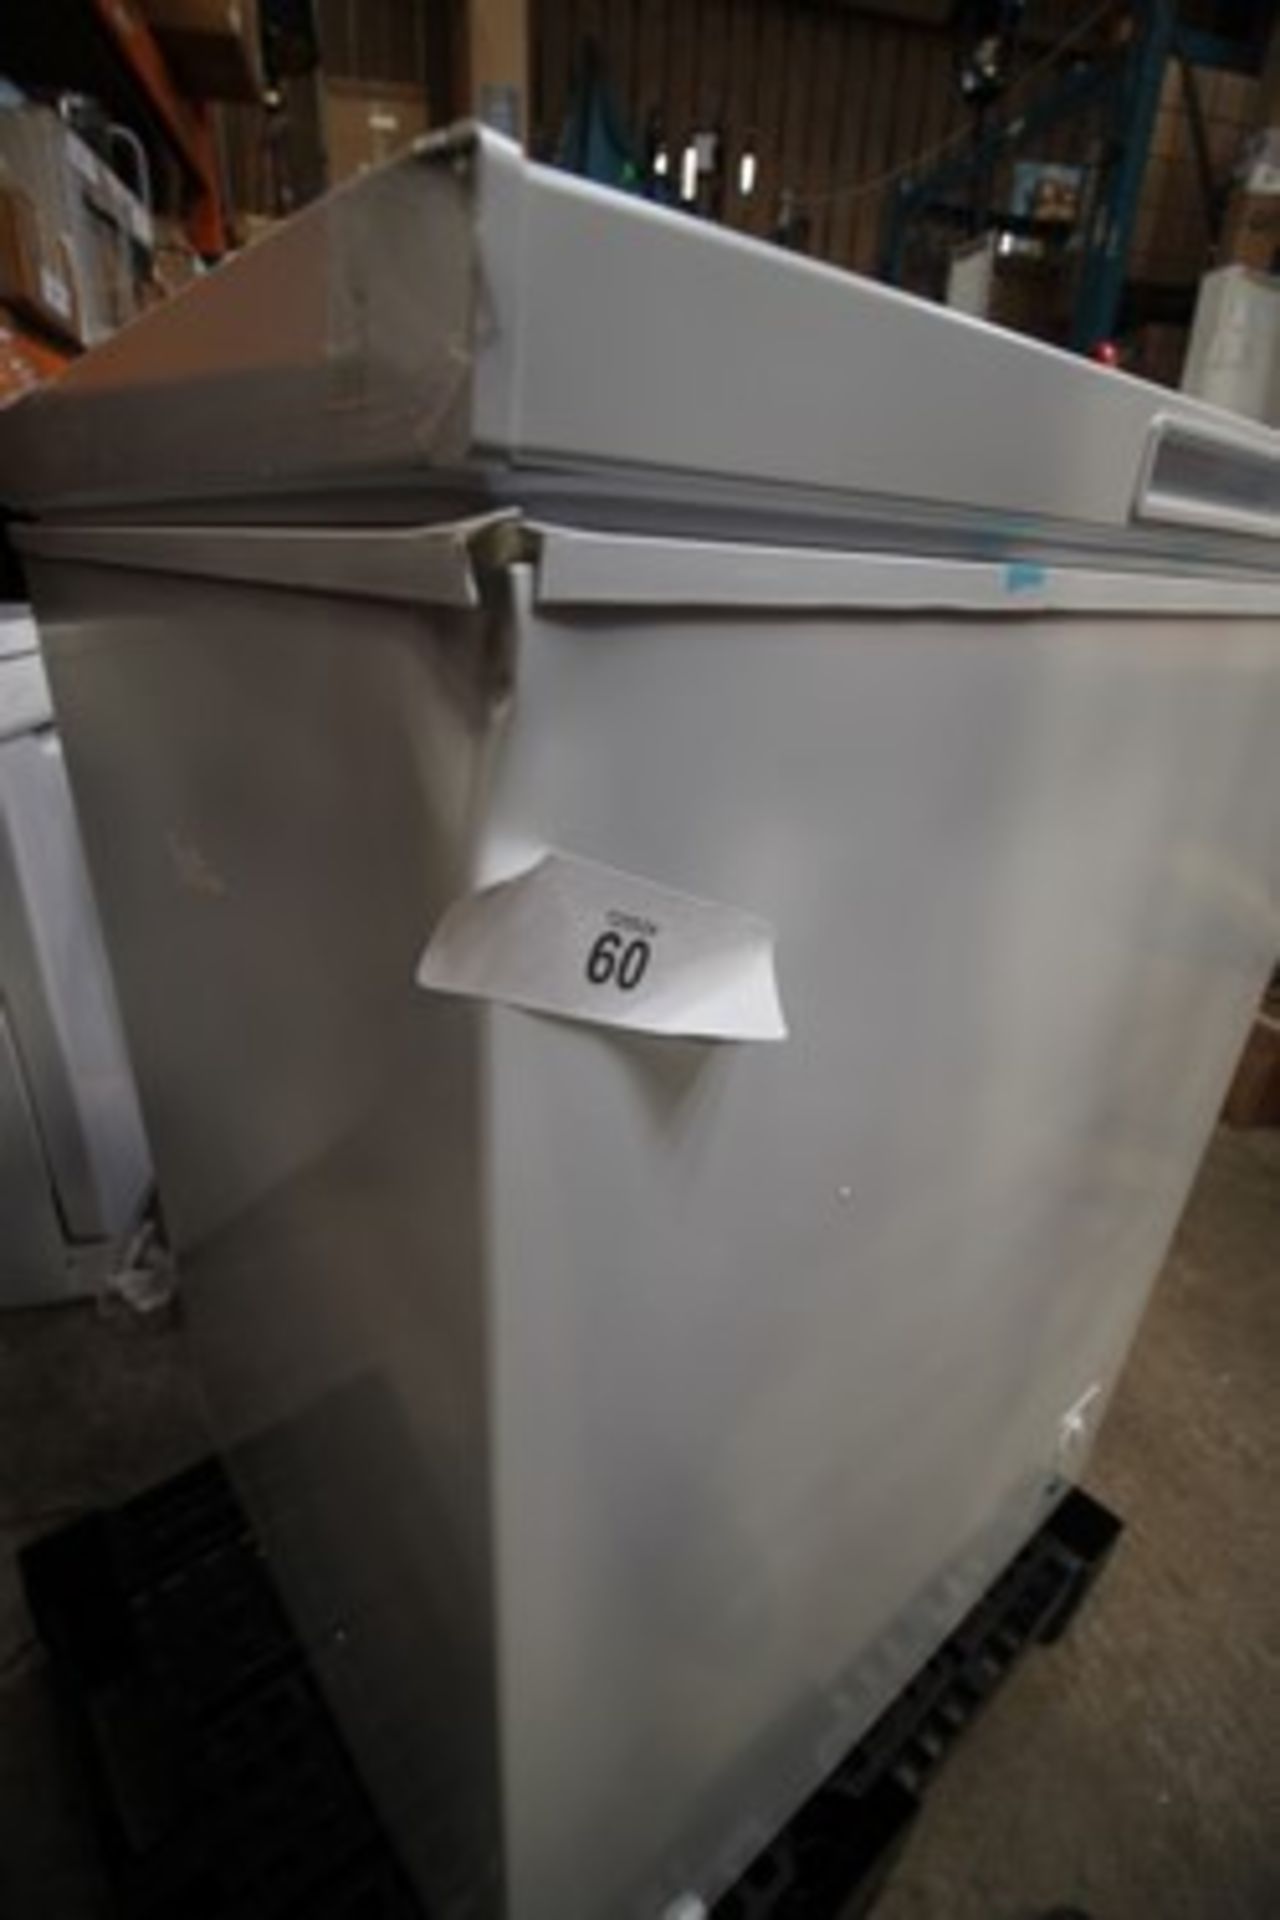 1 x Comfee chest freezer, Model 483RCC143WH, split inside edge of door, dented to front corner and - Image 3 of 4